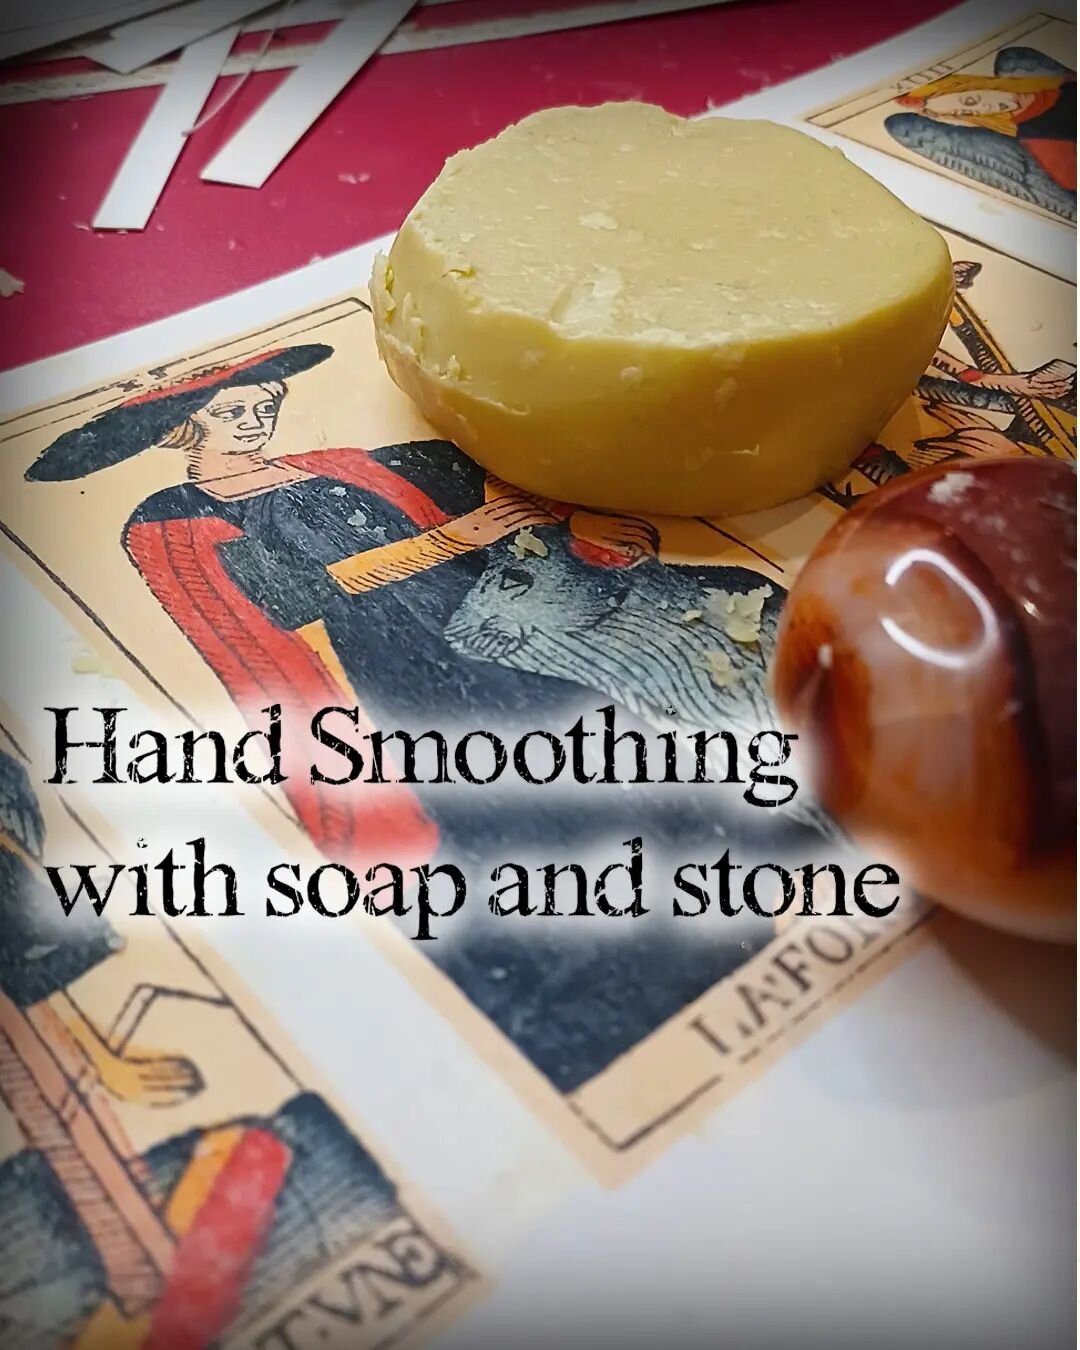 🙌SMOOTHING🙌

I explain in this post what is the smoothing and why I use it for my handcrafted decks.

#tarotdemarseille #tarotdeck #tarotdecks #tarotdecksforsale #tarotdeckforsale #historictarotdecks #historictarotdeck #historictarotdemarseille #hi